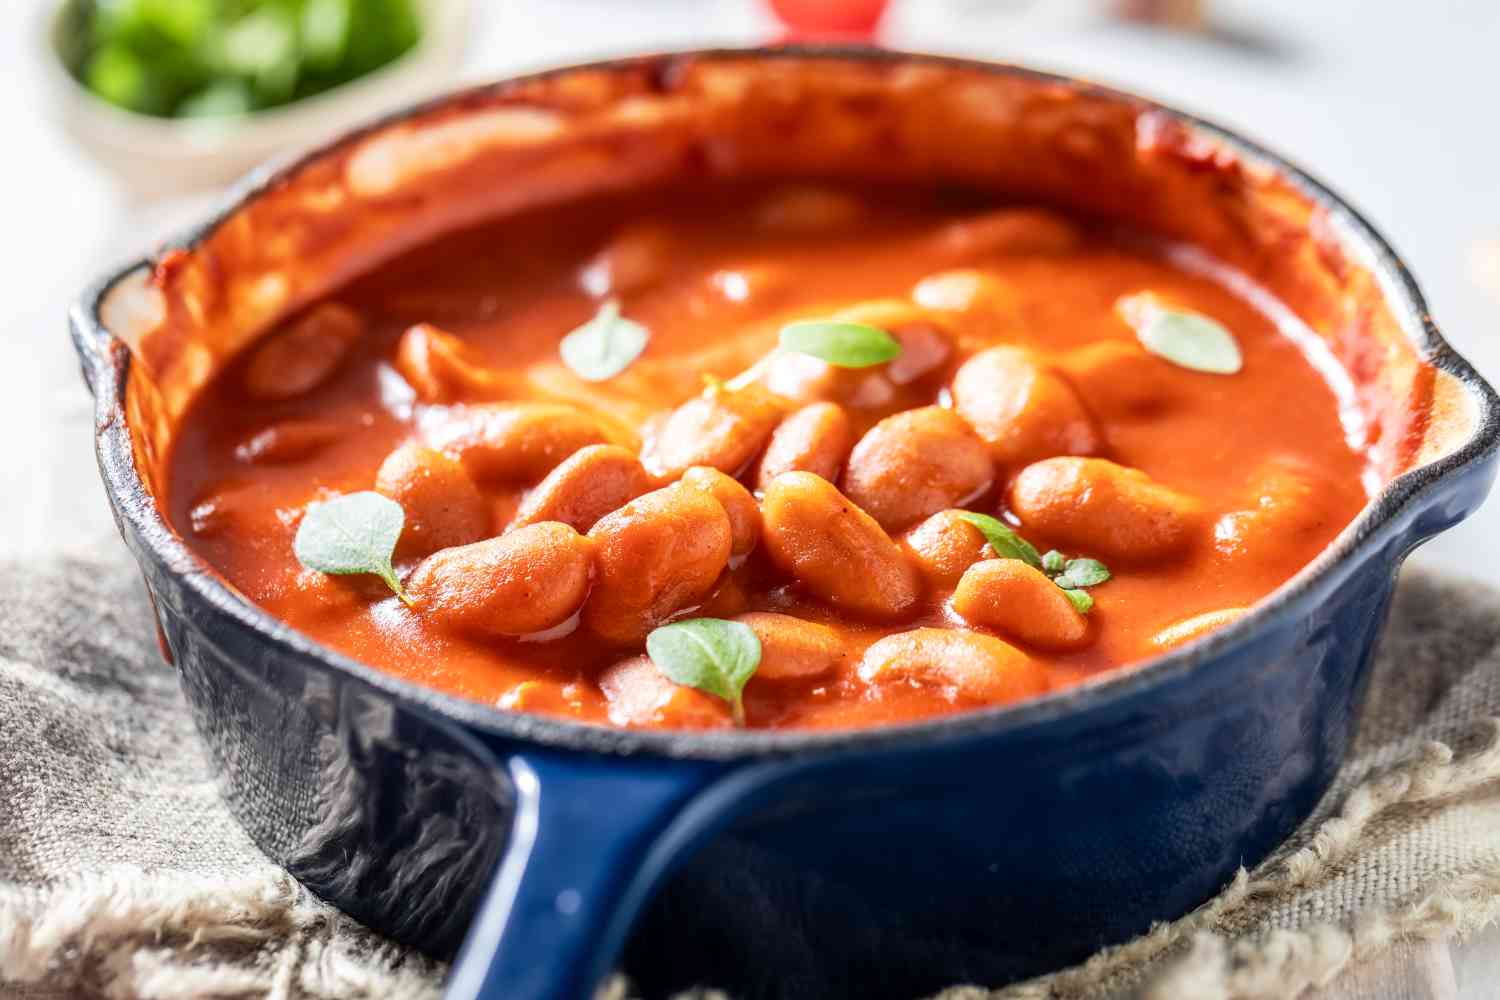  Healthy Baked Beans